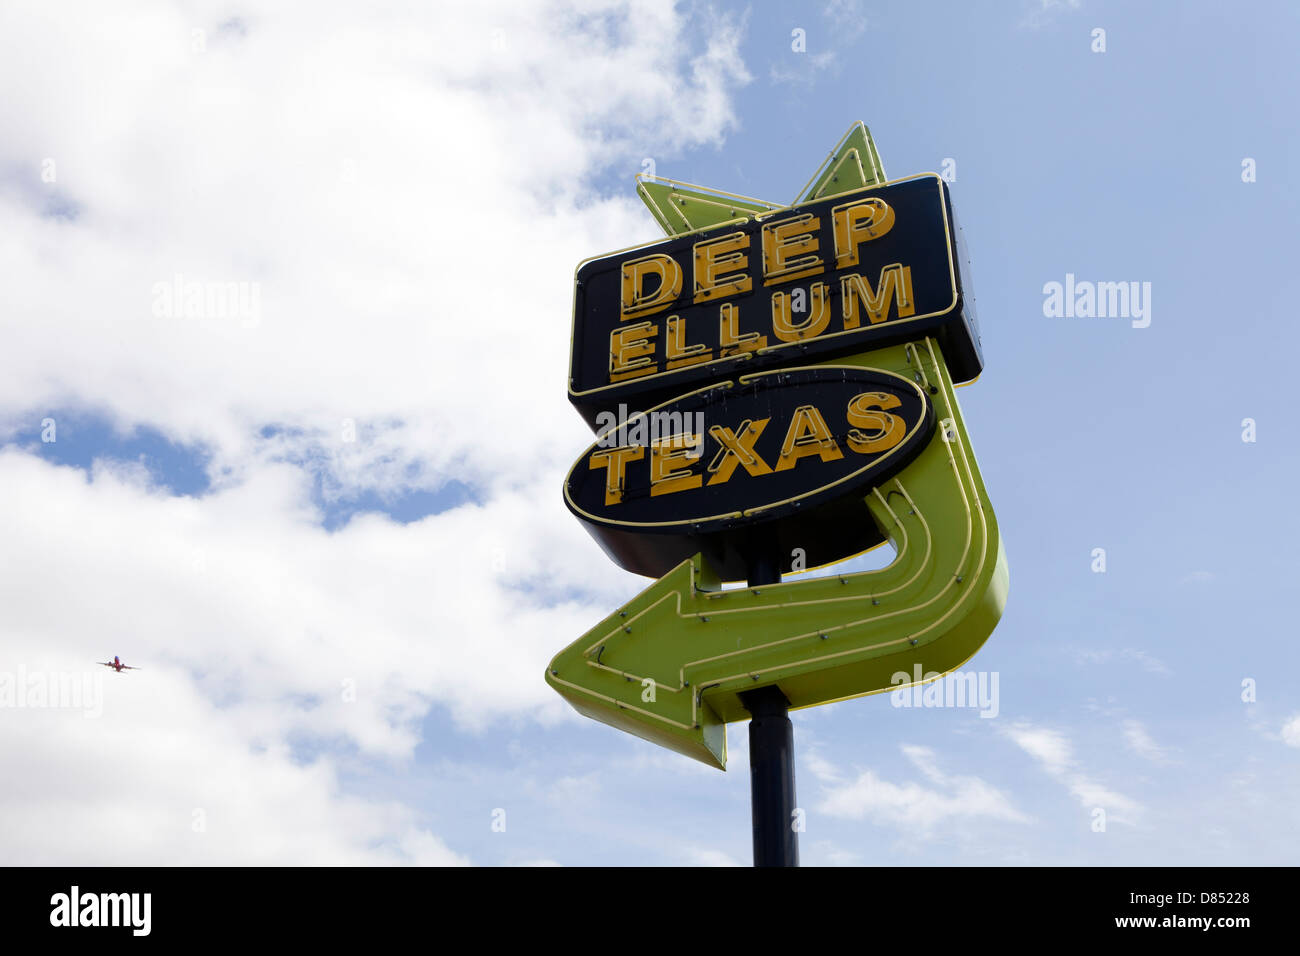 A view of a sign in Deep Ellum in Dallas, Texas Stock Photo